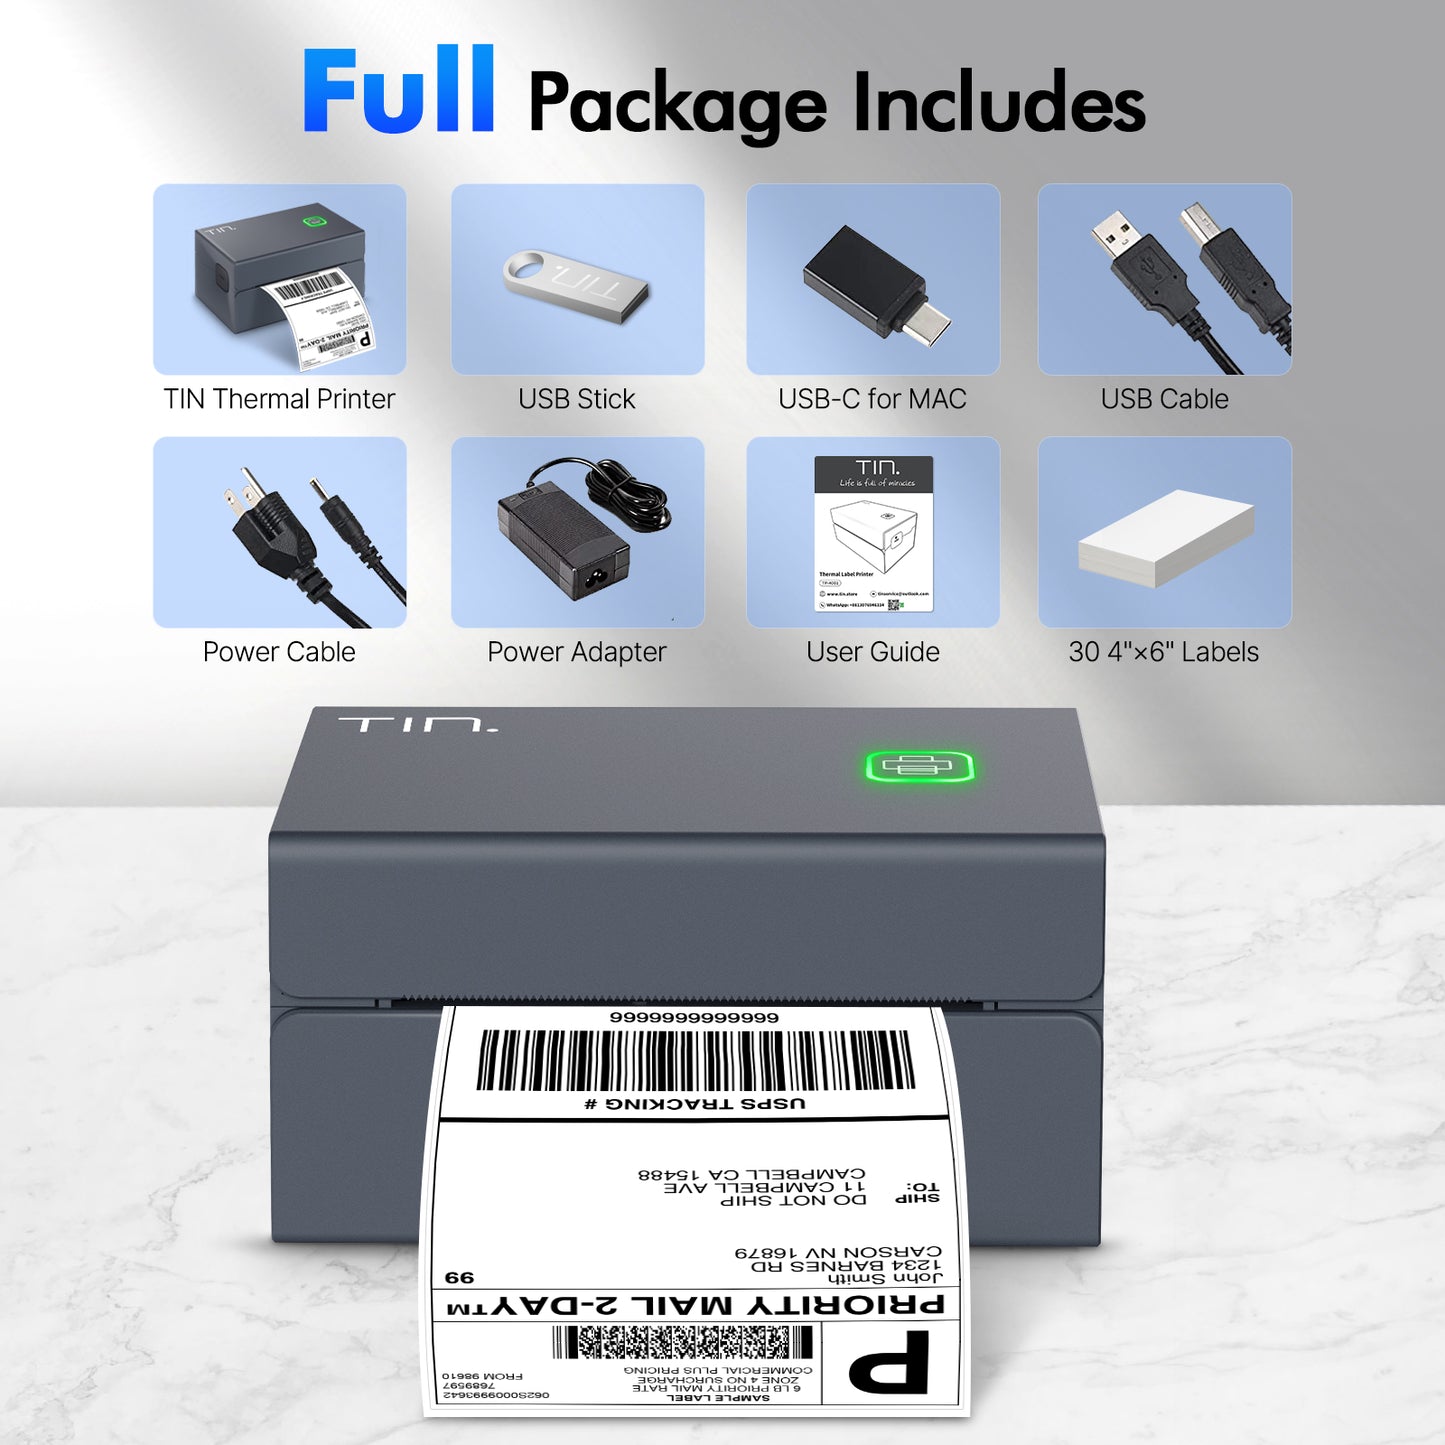 Thermal Label Printer, TIN Label Printer 4X6 for Small Business, USB3.0 Printer Supports Windows & MacOS & Chromebook, 150mm/s High-Speed Inkless Shipping Label Maker for UPS, USPS, Amazon, ebay, Etsy